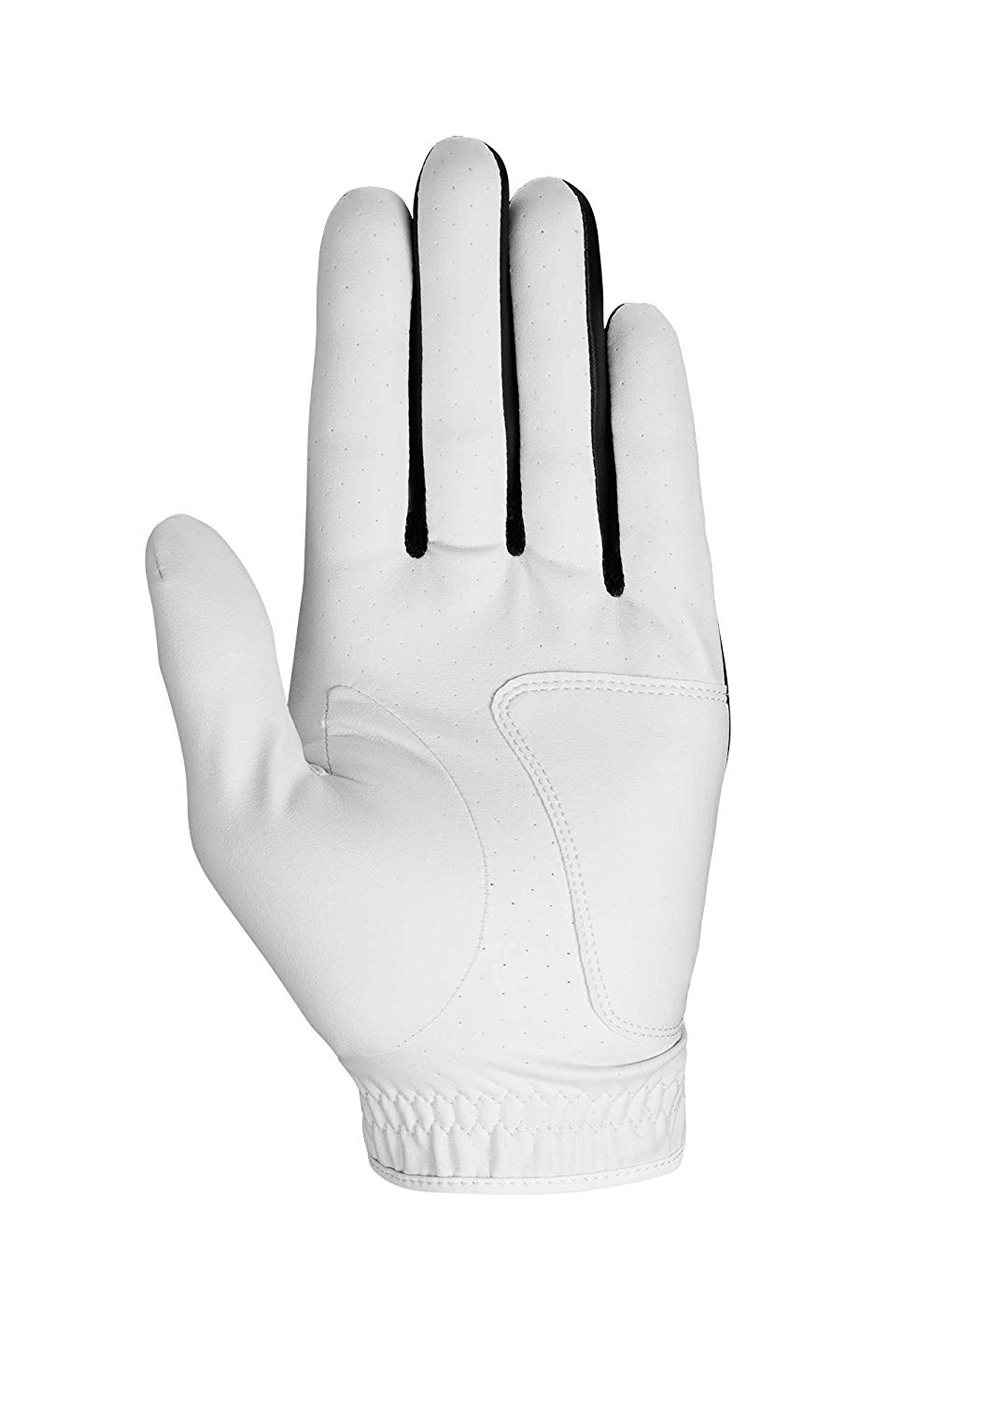 Callaway Golf Women s Weather Spann Premium Japanese Synthetic Golf Glove Small Single White Worn on Left Hand - image 2 of 2